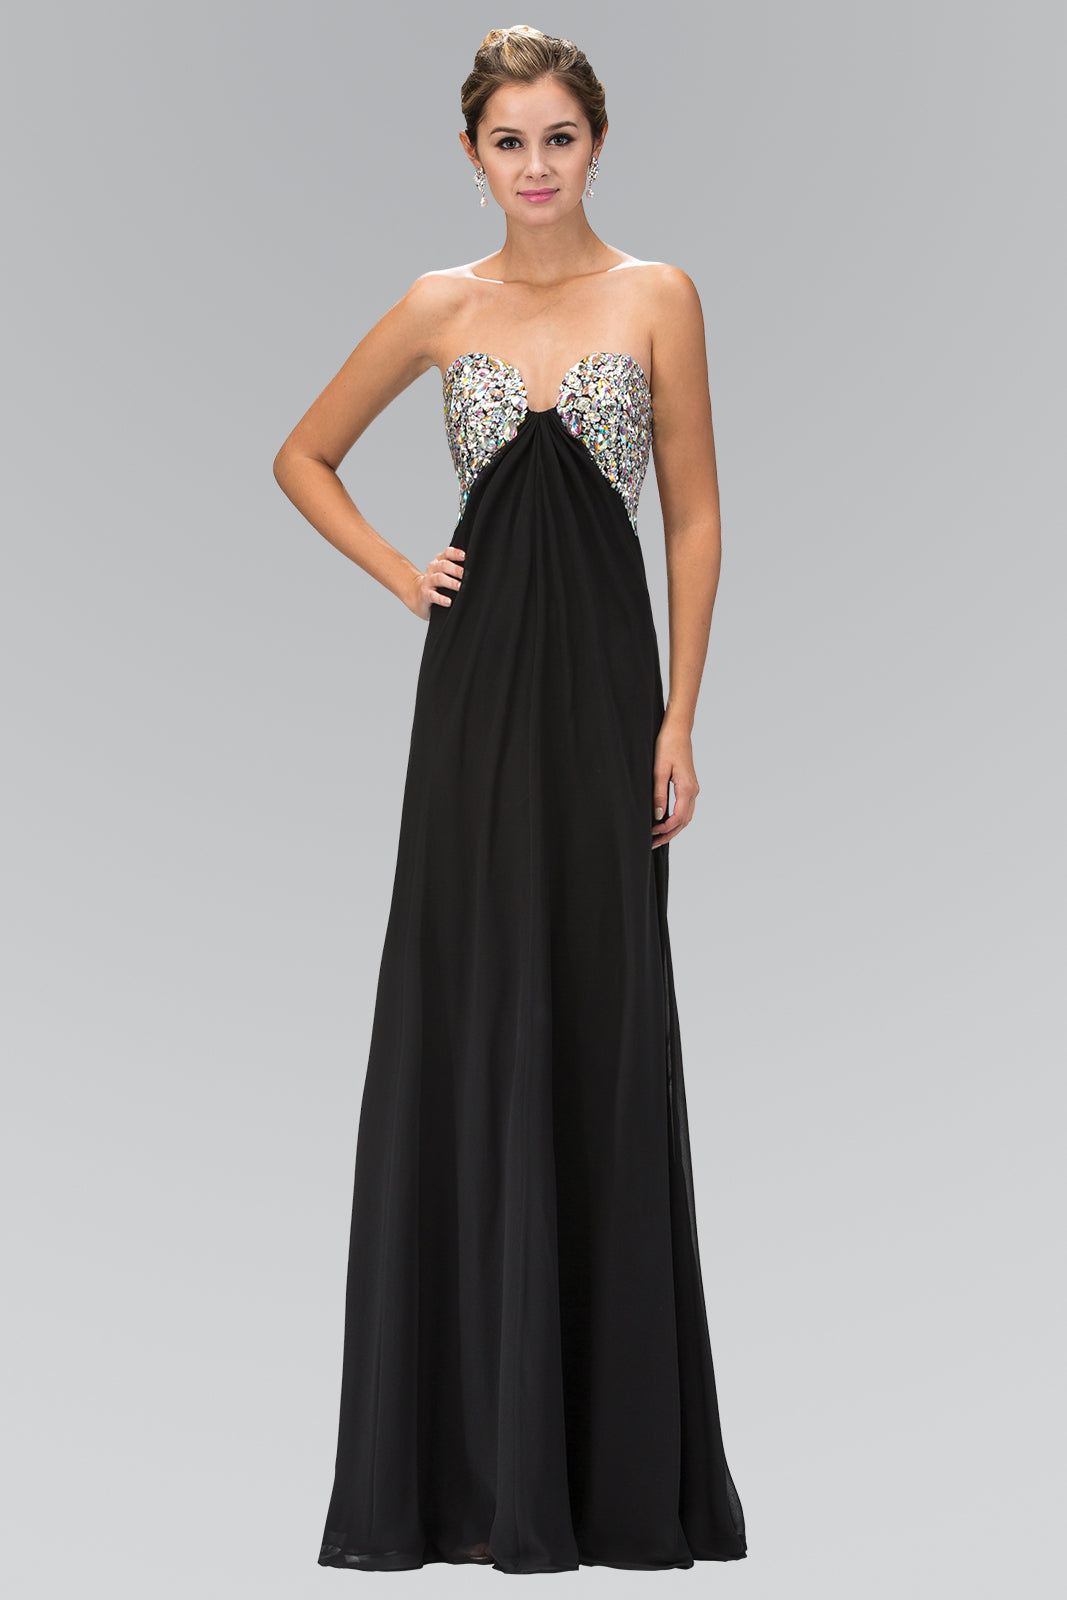 Strapless Open Back Chiffon Long Dress with Jewel Embellished Bust-smcdress